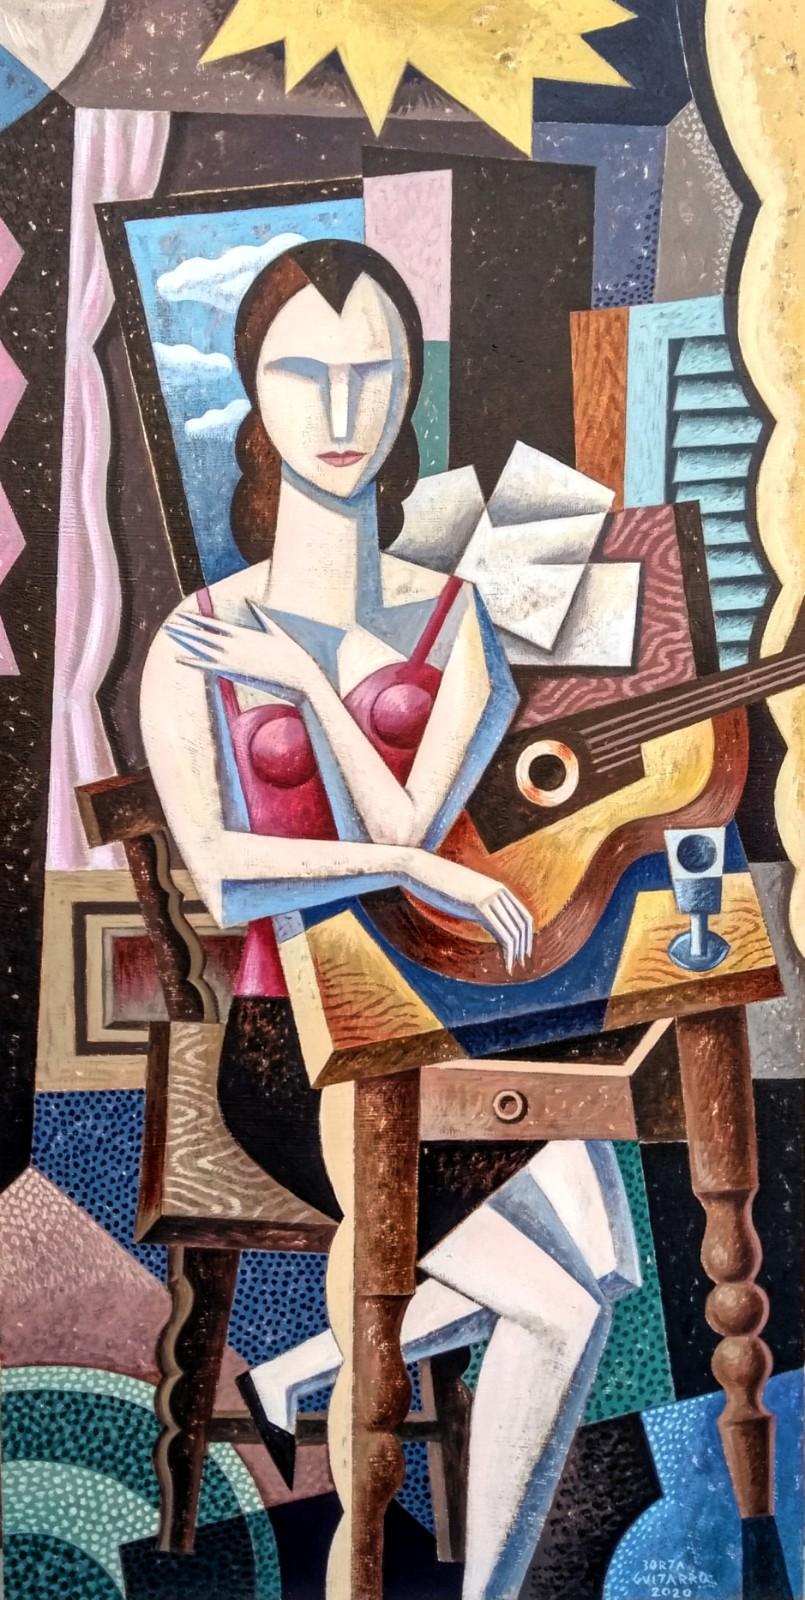 Borja Guijarro Abstract Painting - Amelie with Guitar-original new cubism figurative still life life painting- Art